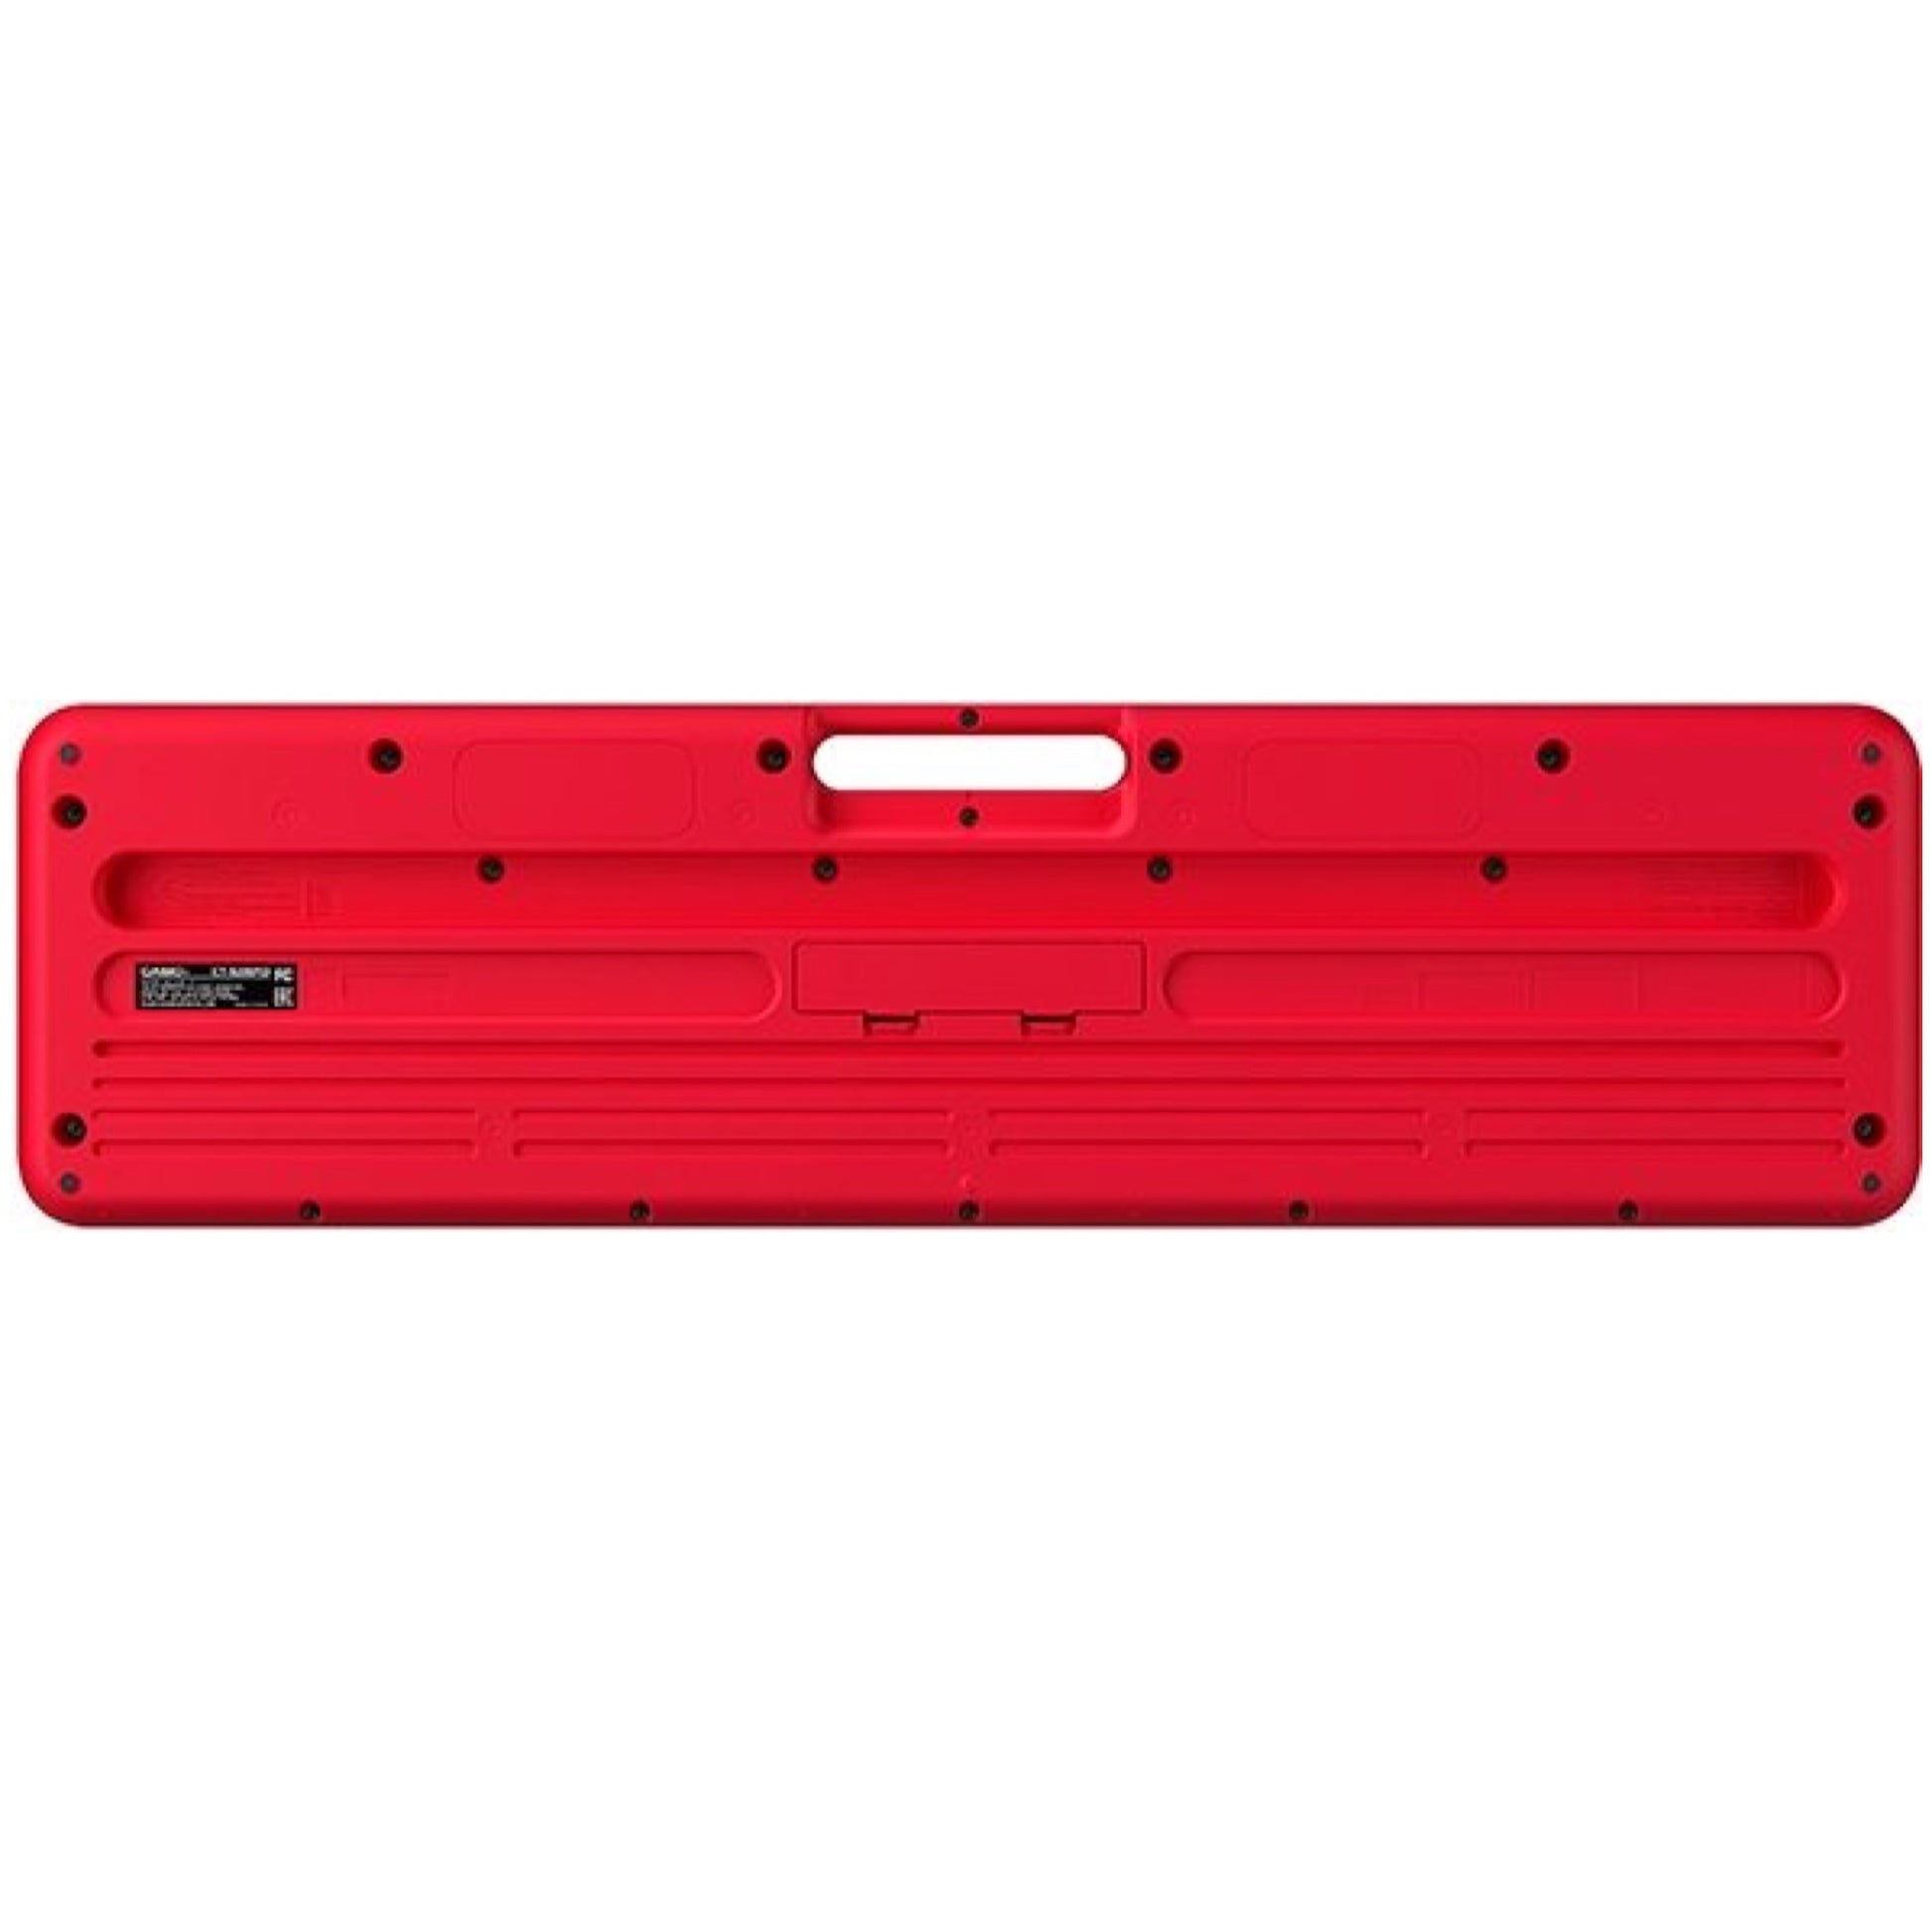 Casio CT-S200 Casiotone Portable Electronic Keyboard with USB, Red